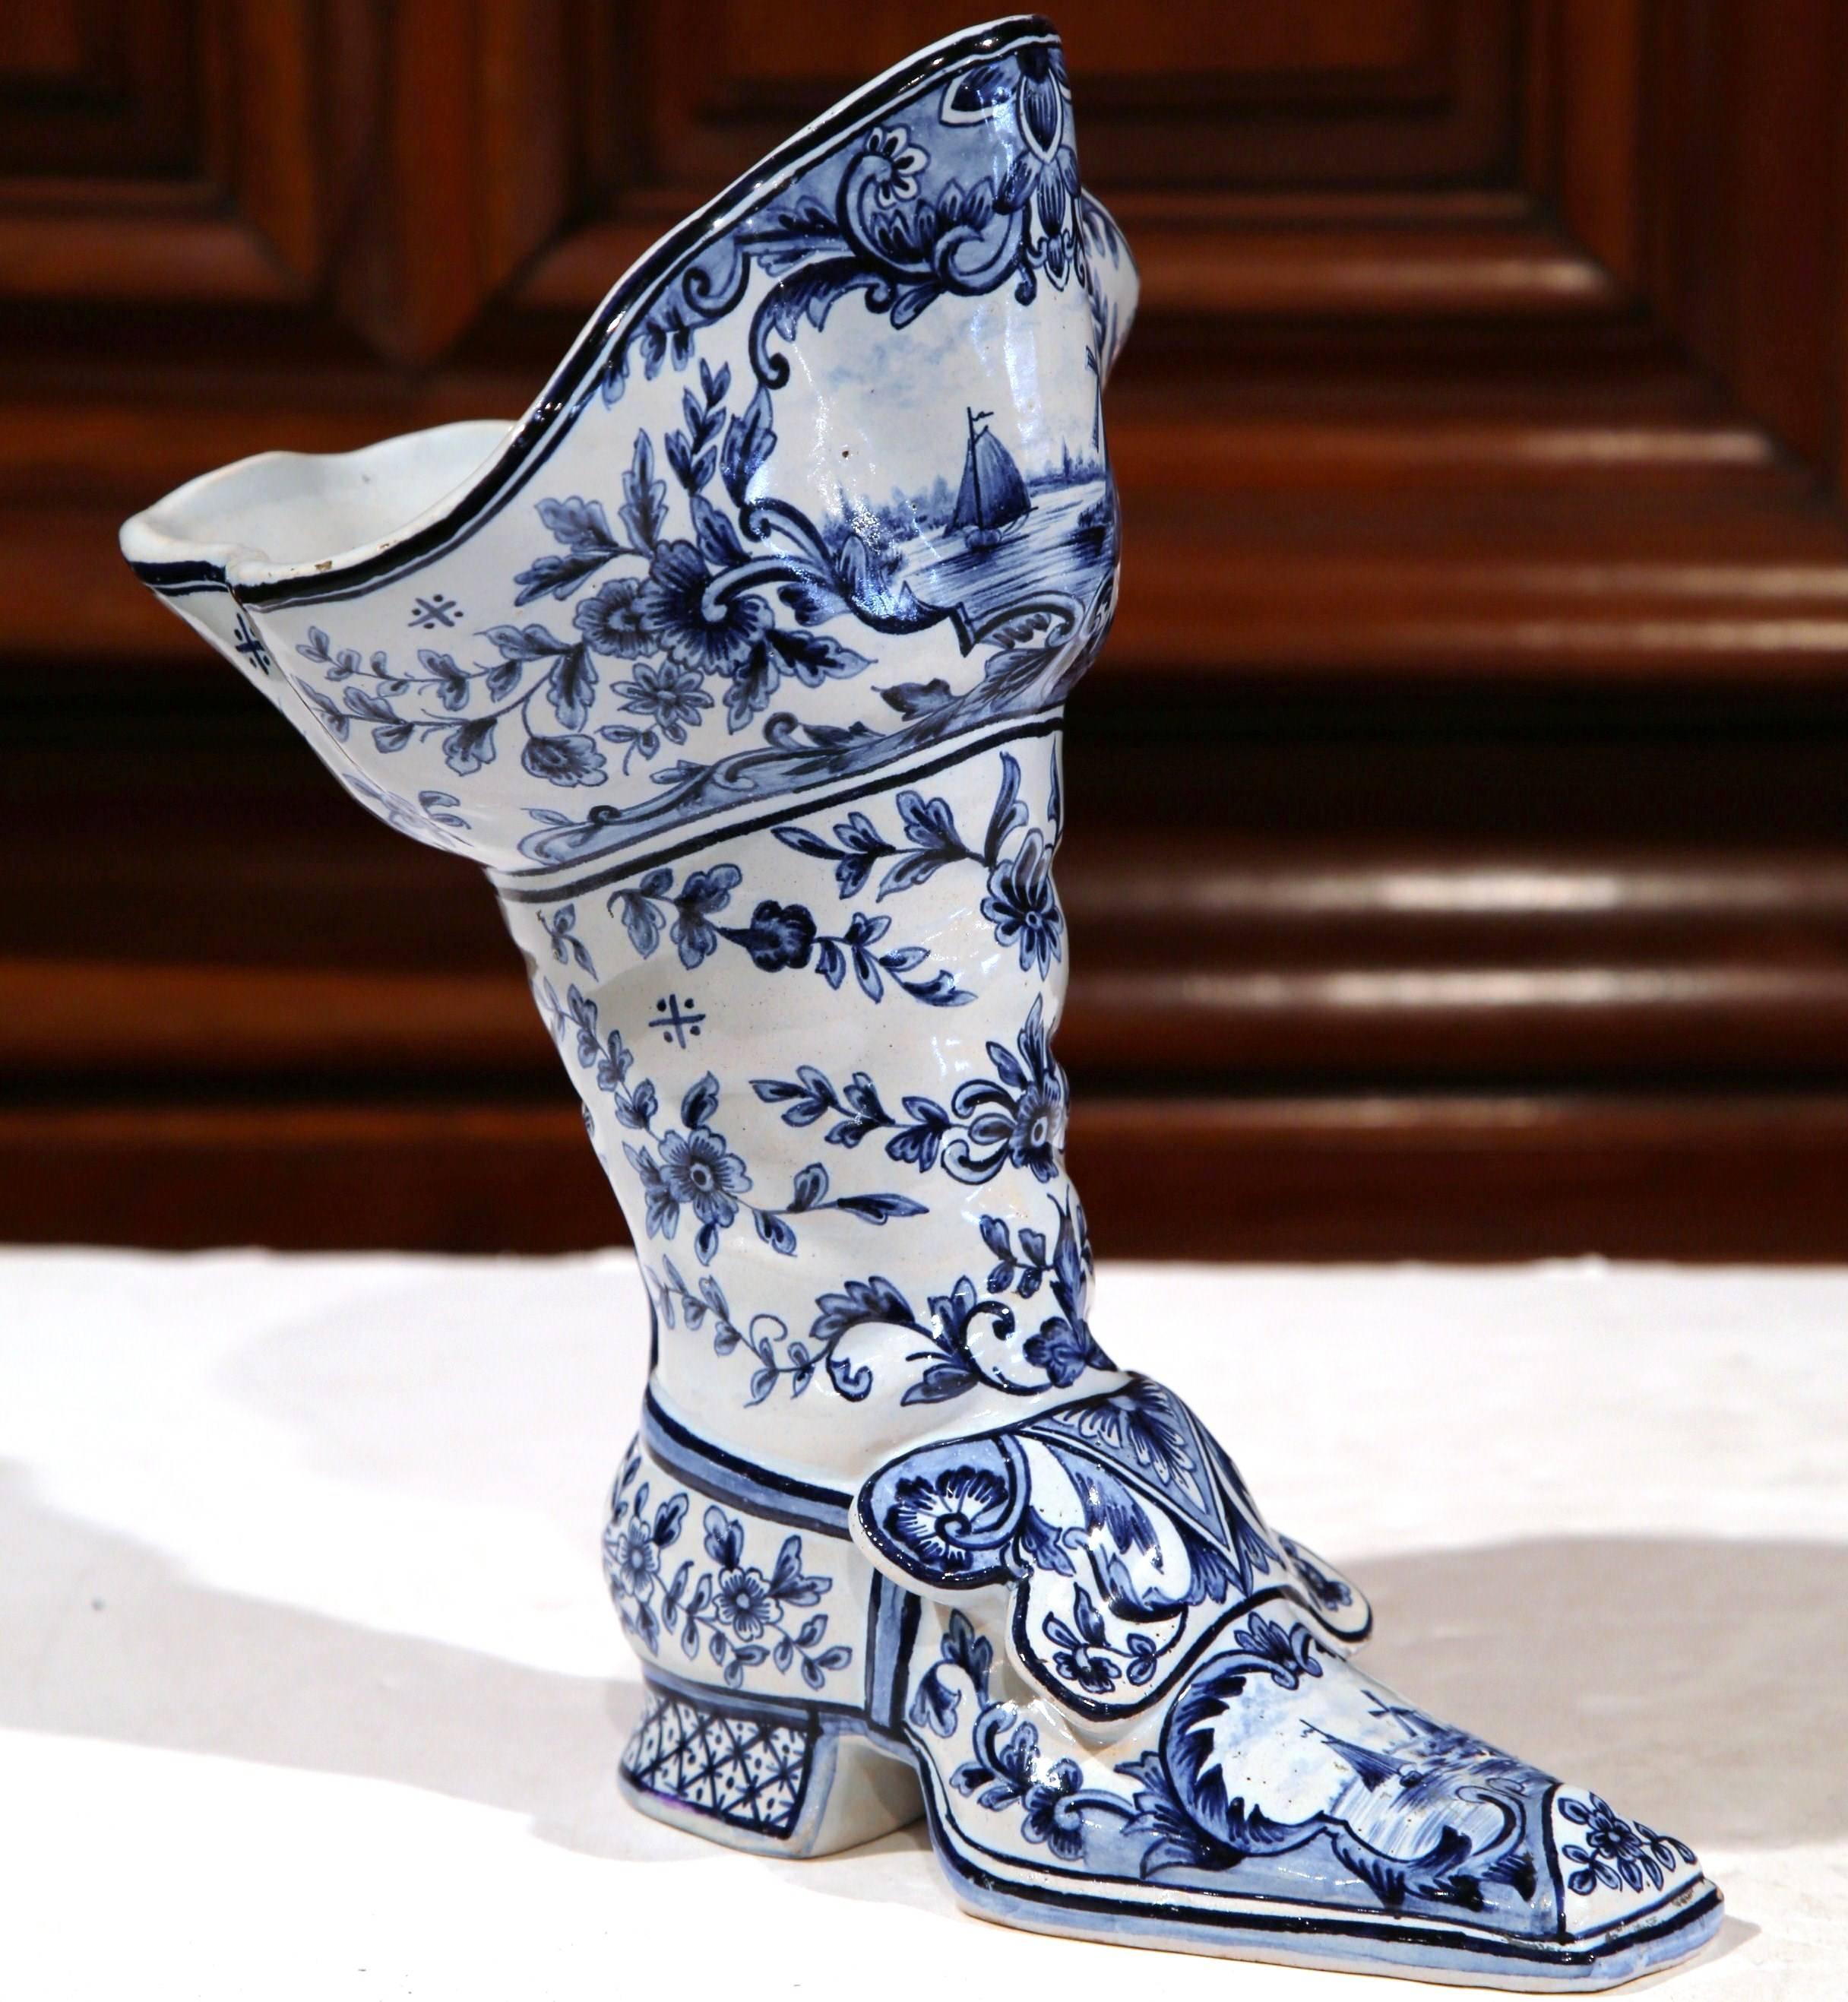 Decorate a tabletop or surface with this interesting faience vase. Crafted, circa 1900, the colorful vase is sculpted to be a man's boot, and embellished with hand-painted blue and white delft hand-painted motifs including a windmill, sailboat and